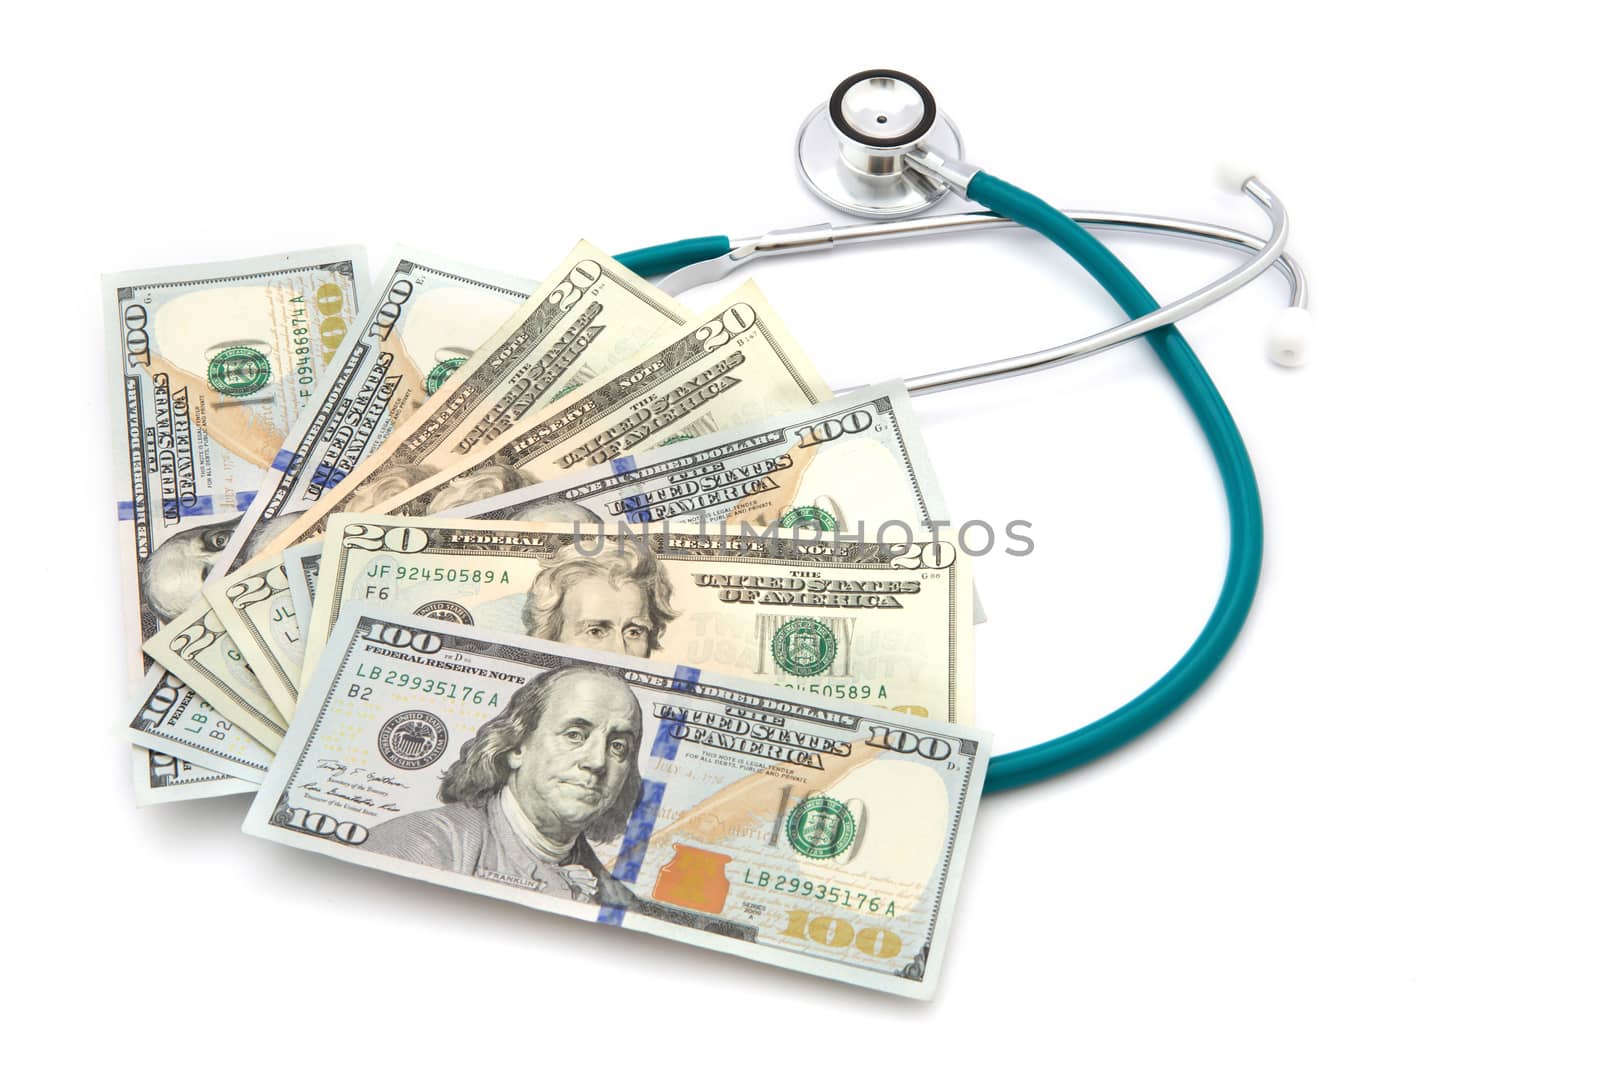 health care costs - Stethoscope on money background by rufous